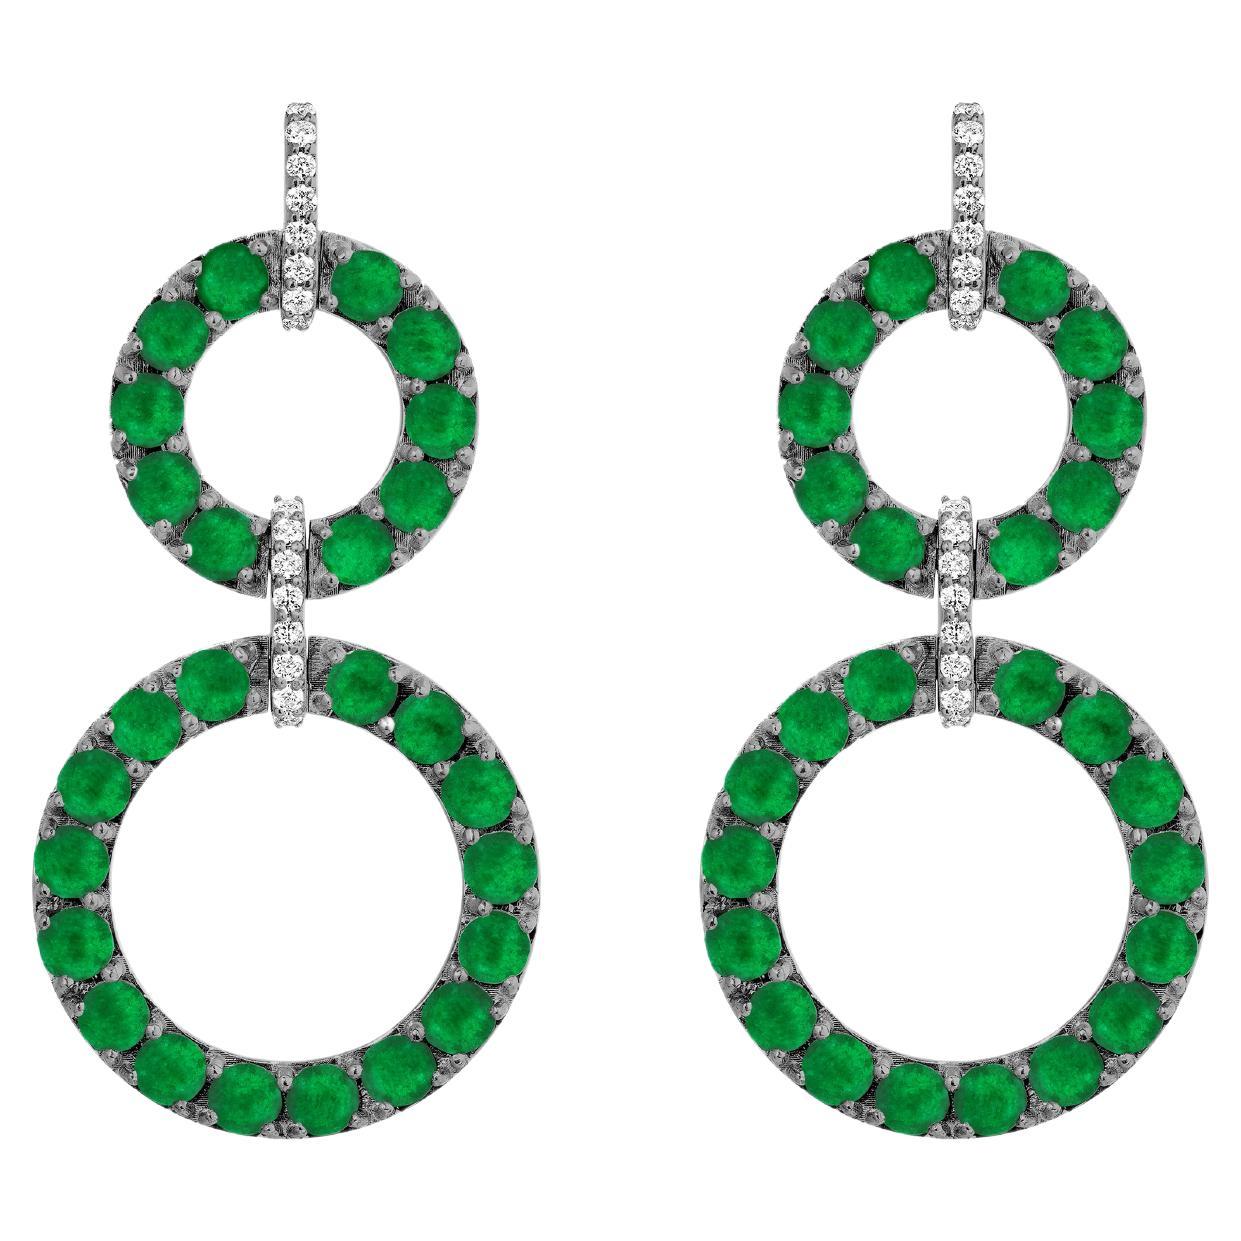 Goshwara Emerald Cabochon 2 Row Earrings With Diamonds For Sale